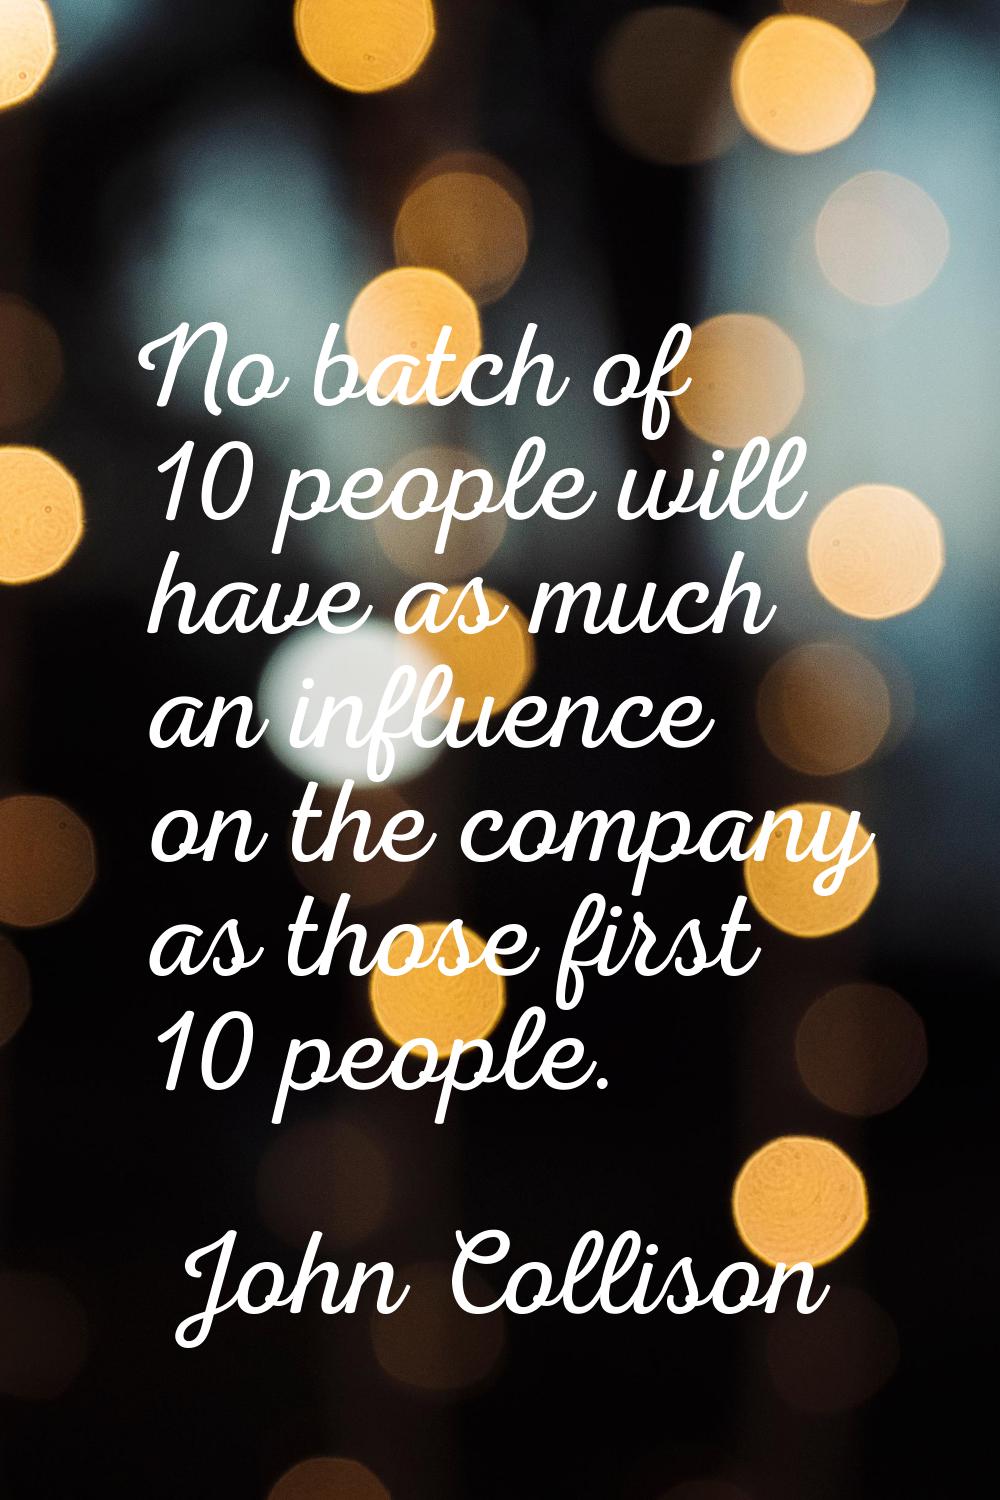 No batch of 10 people will have as much an influence on the company as those first 10 people.